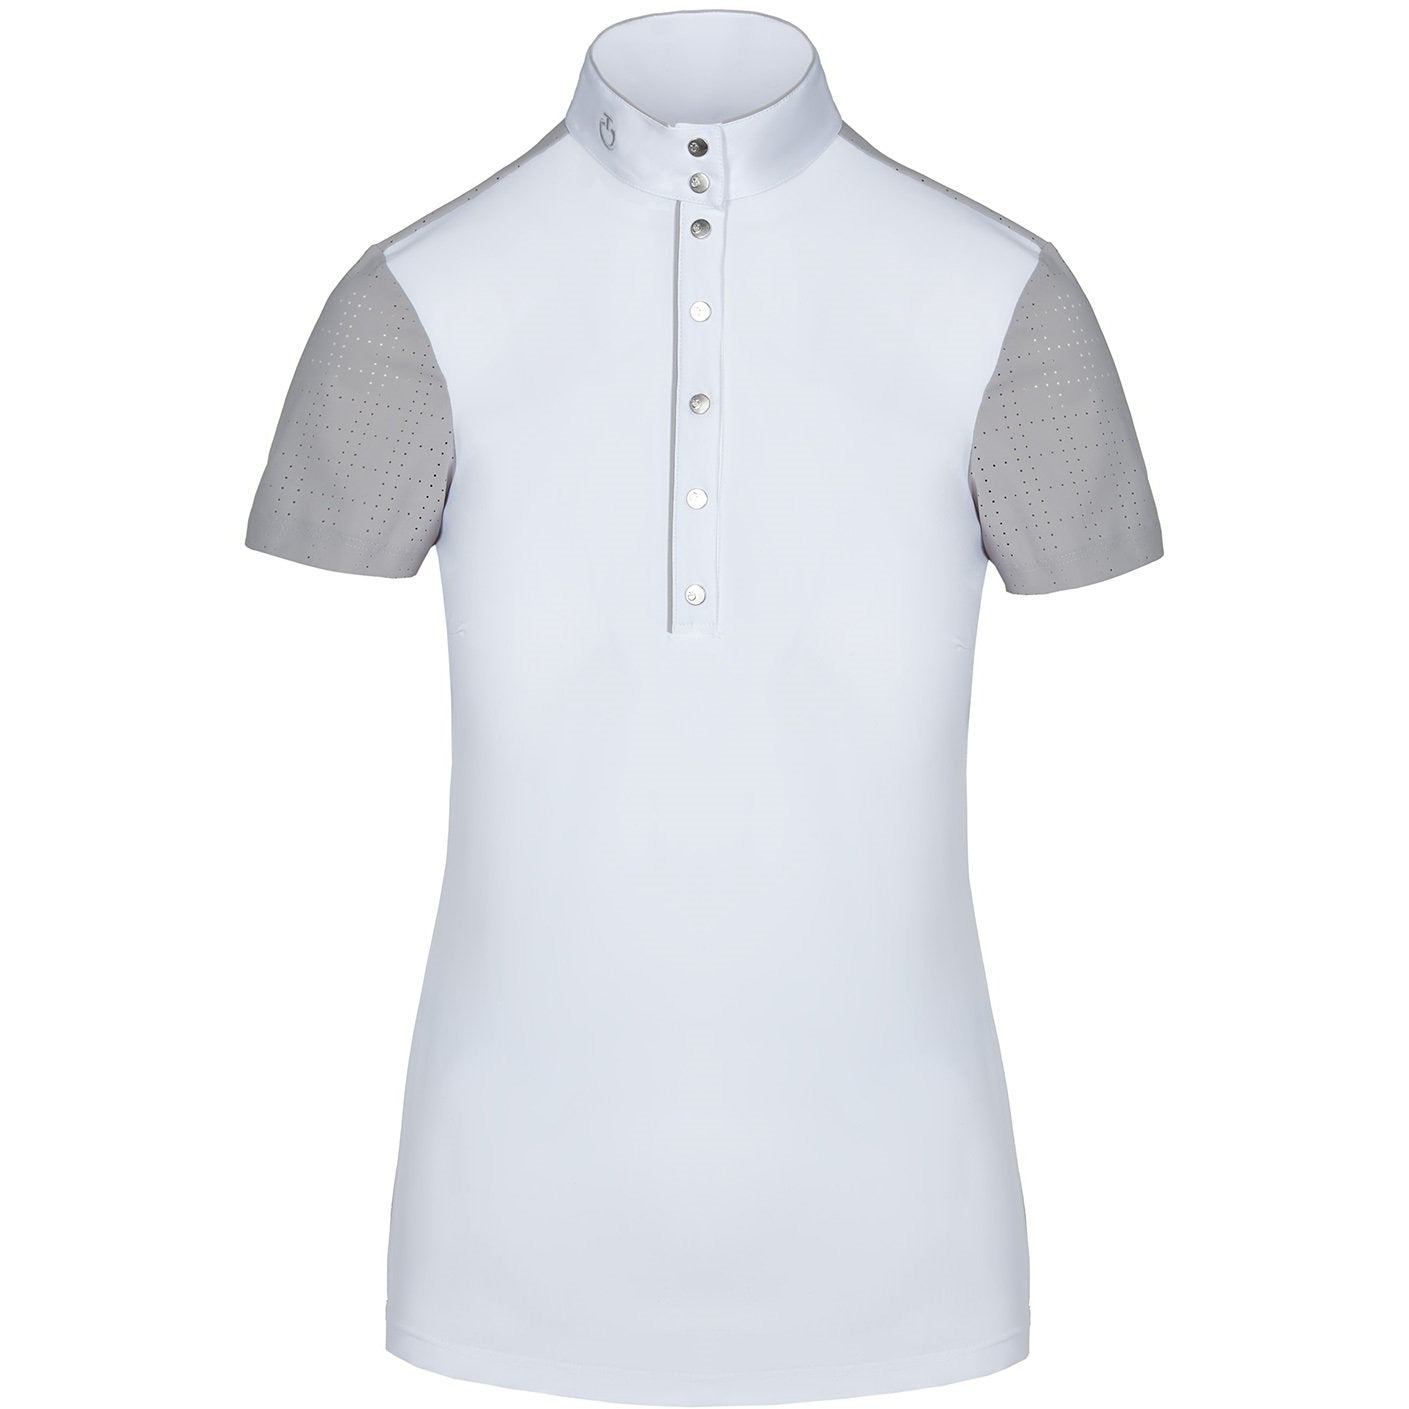 Cavalleria Toscana Perforated Competition Shirt - M